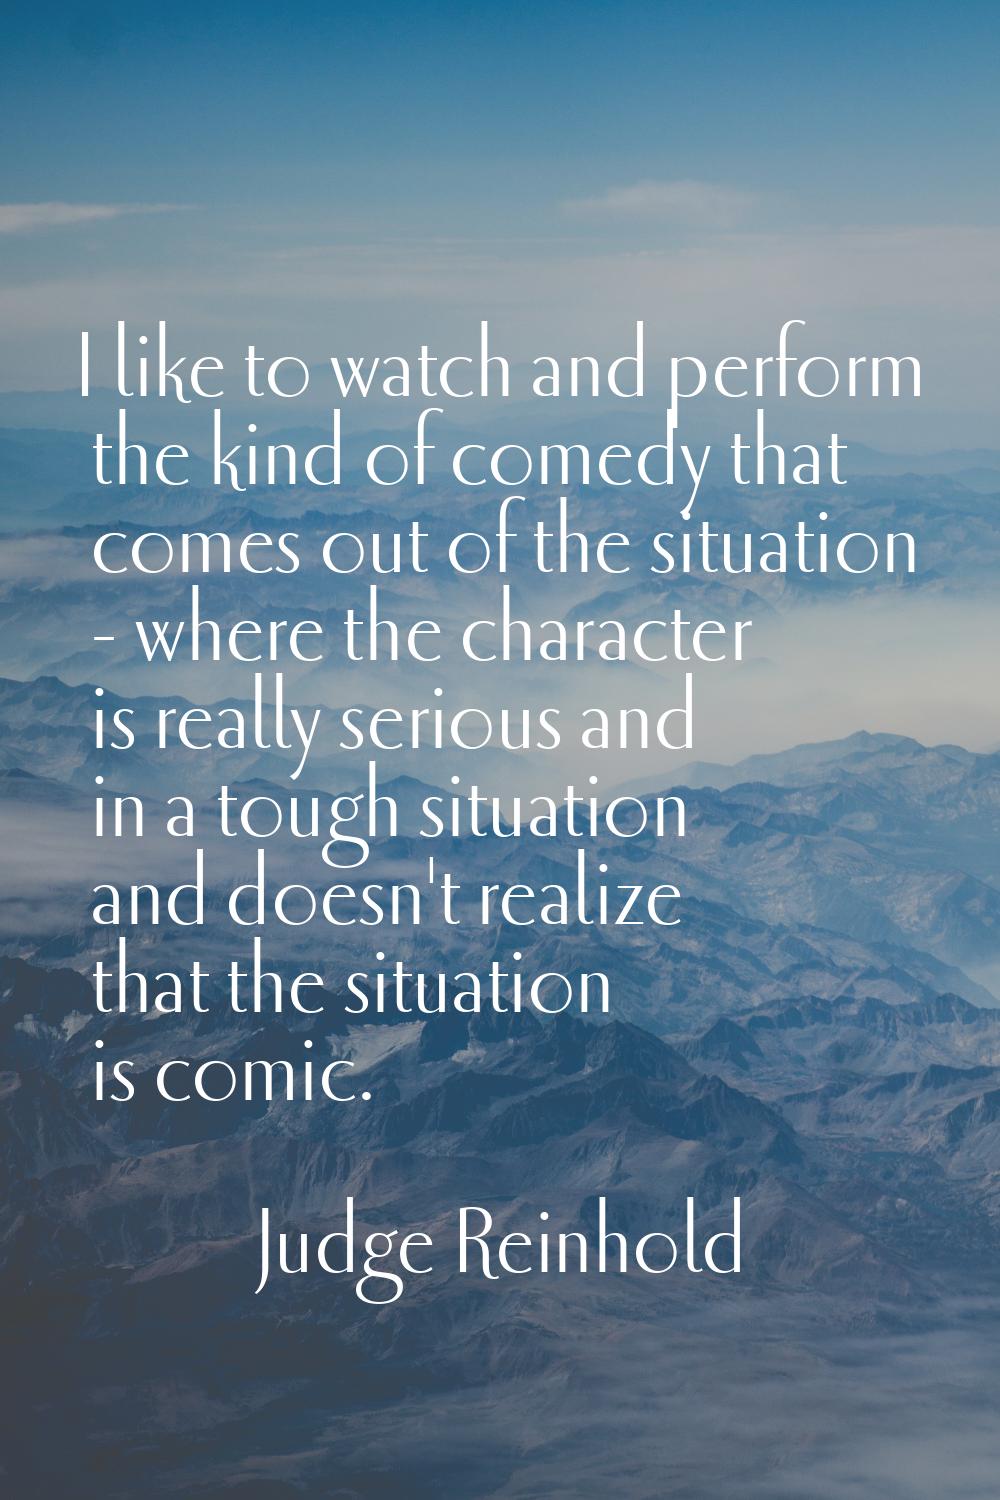 I like to watch and perform the kind of comedy that comes out of the situation - where the characte